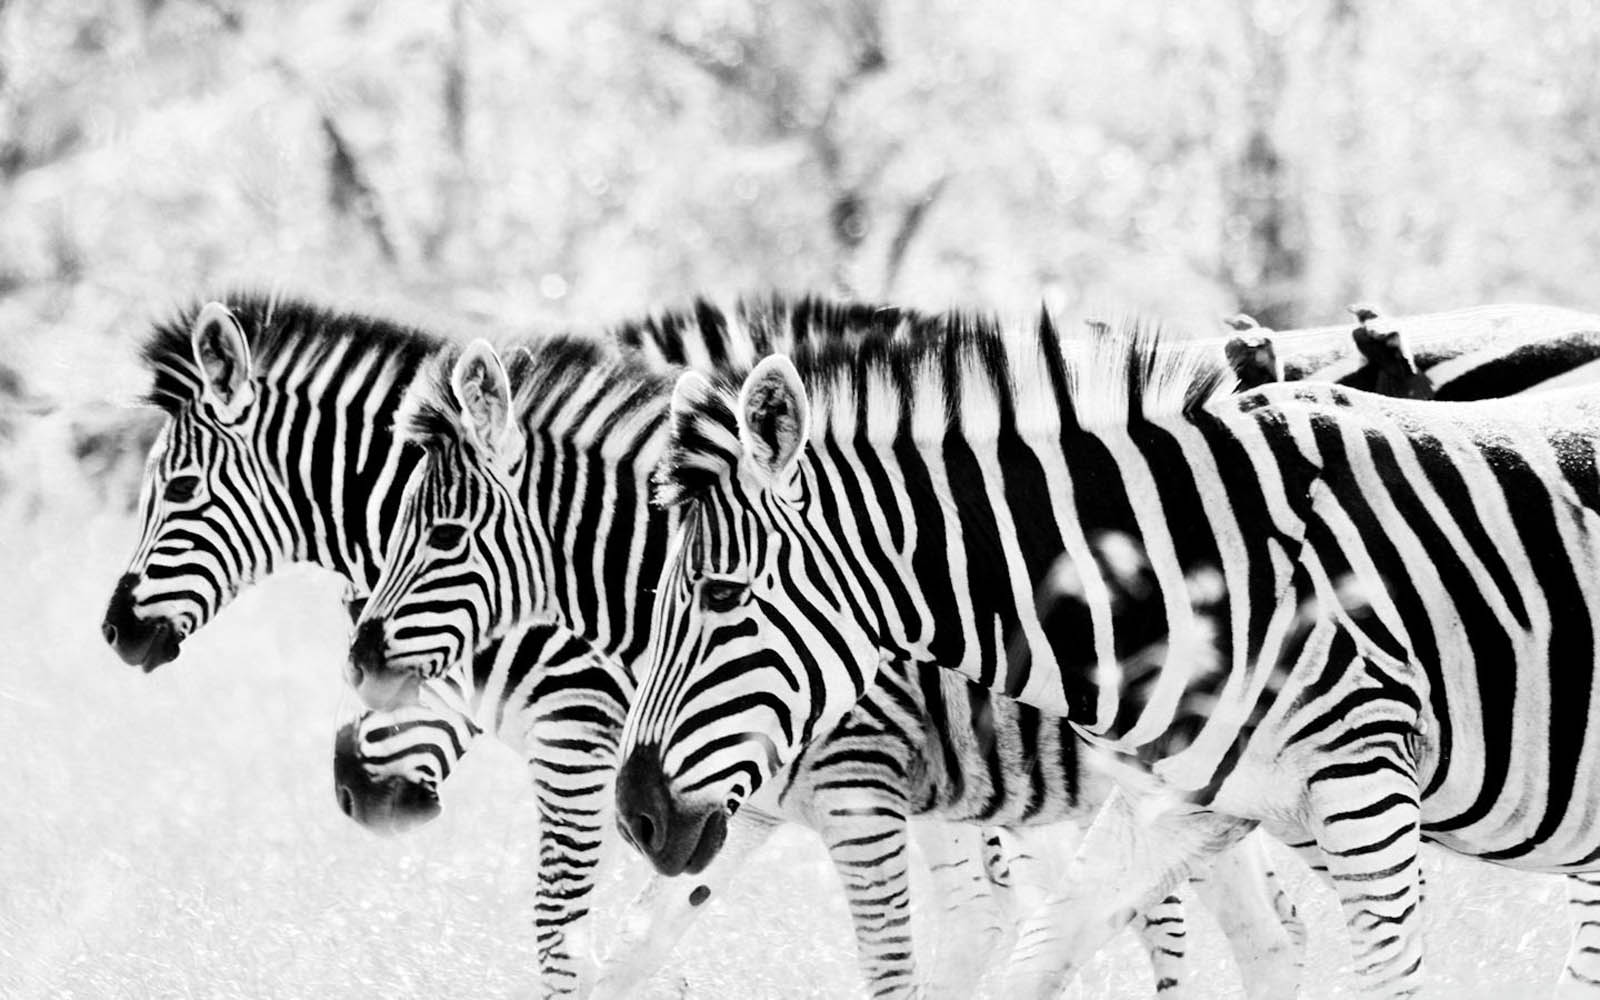 Tag Zebra Wallpaper Background Photos Image And Pictures For